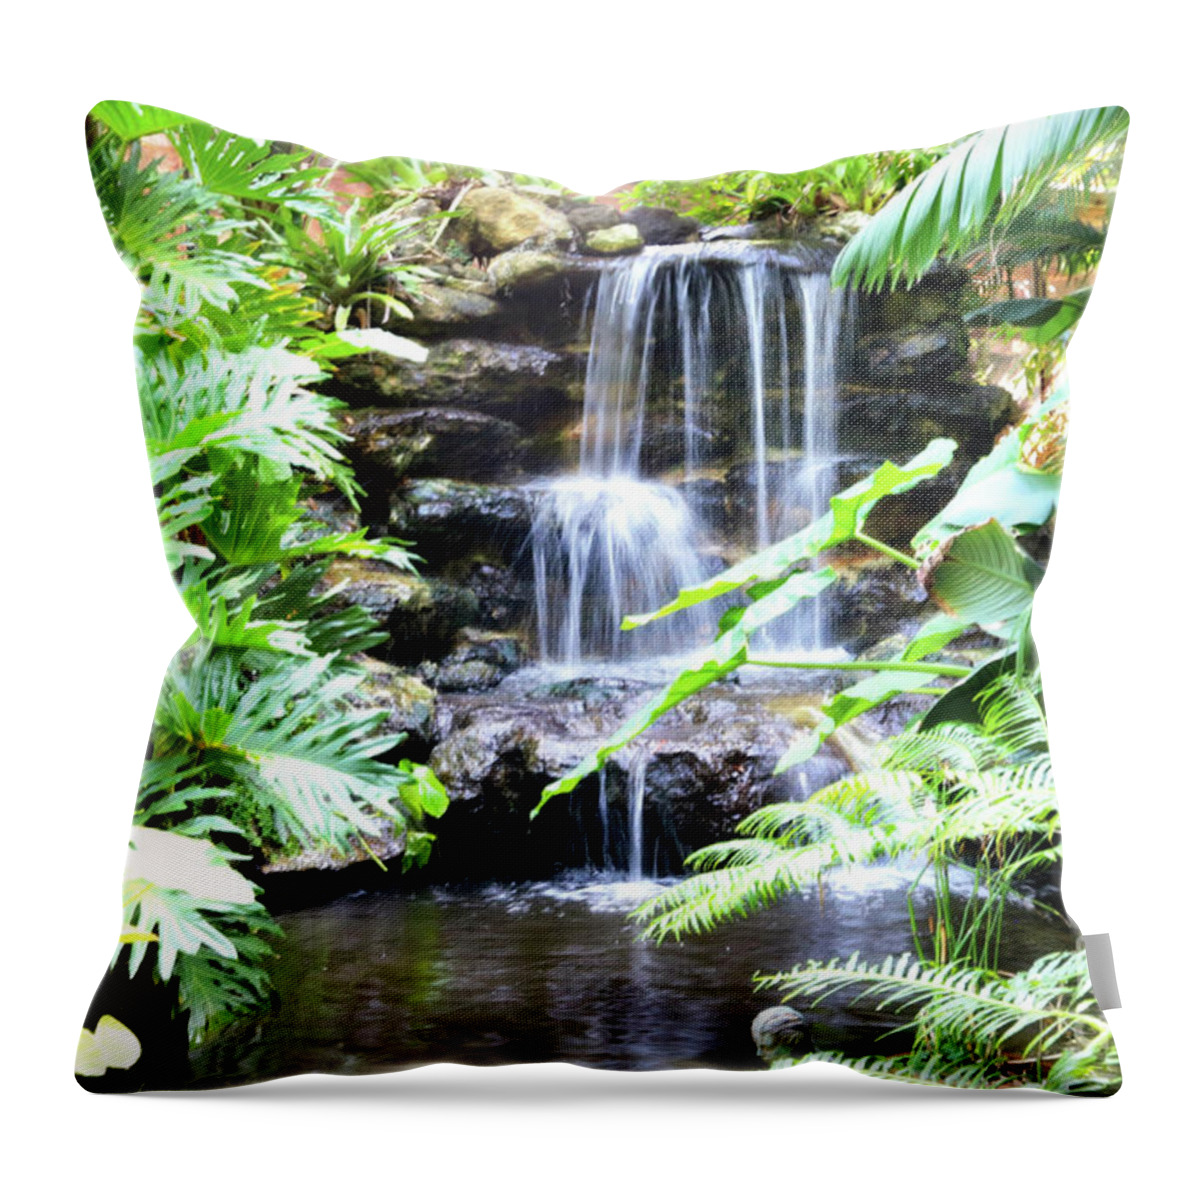 Waterfall Throw Pillow featuring the photograph Tropical Waterfall by Carol Groenen